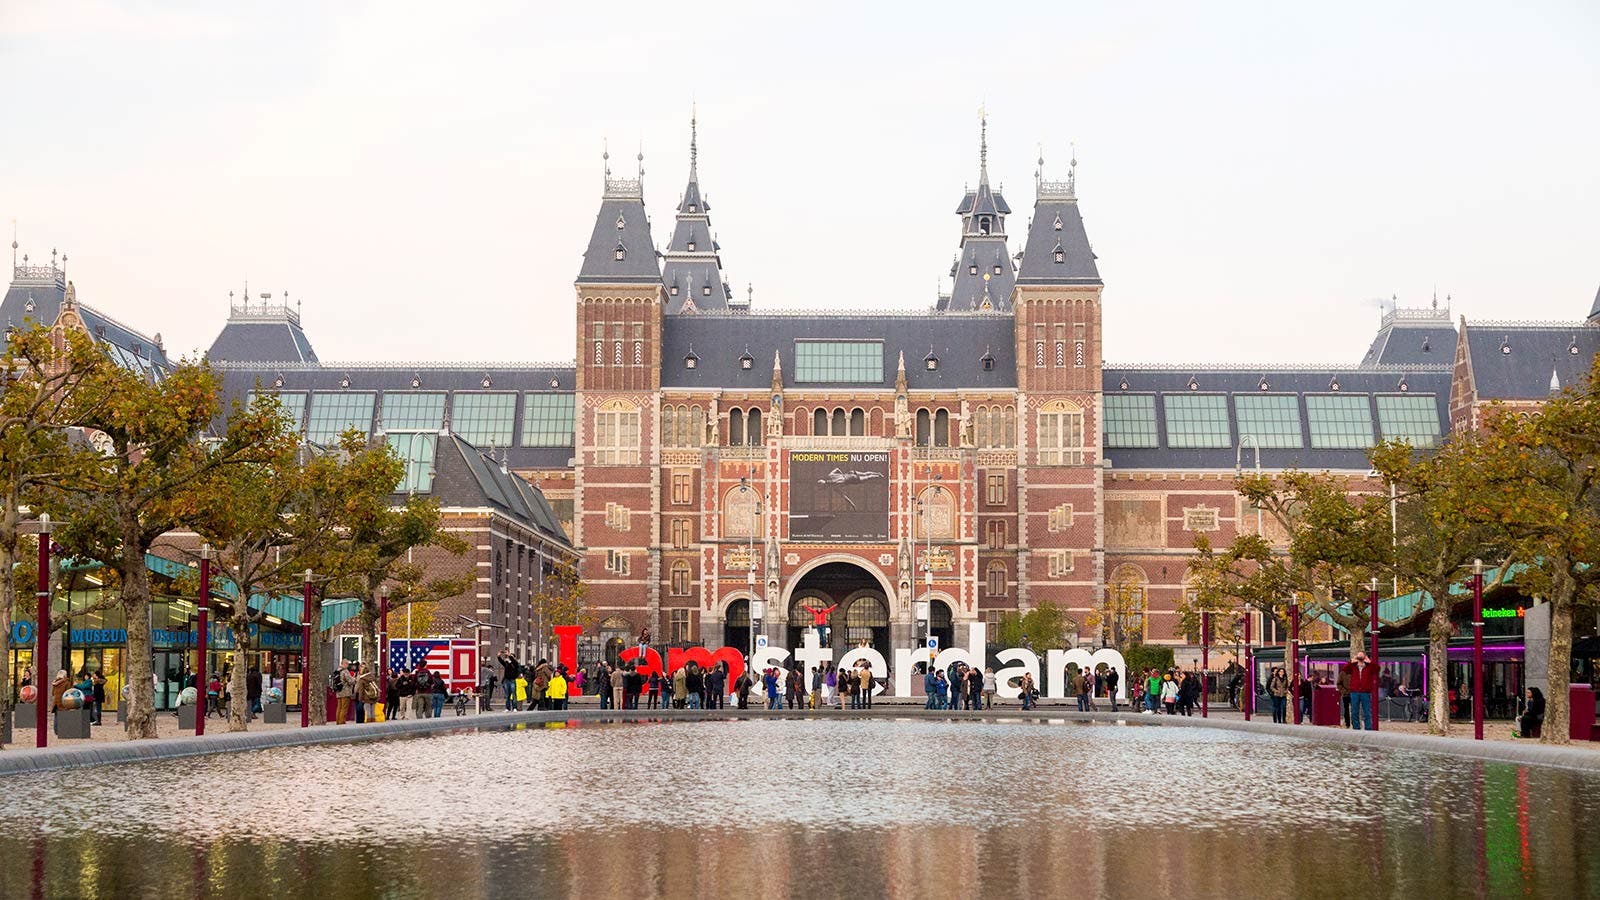 Dutch art and history at the Rijksmuseum